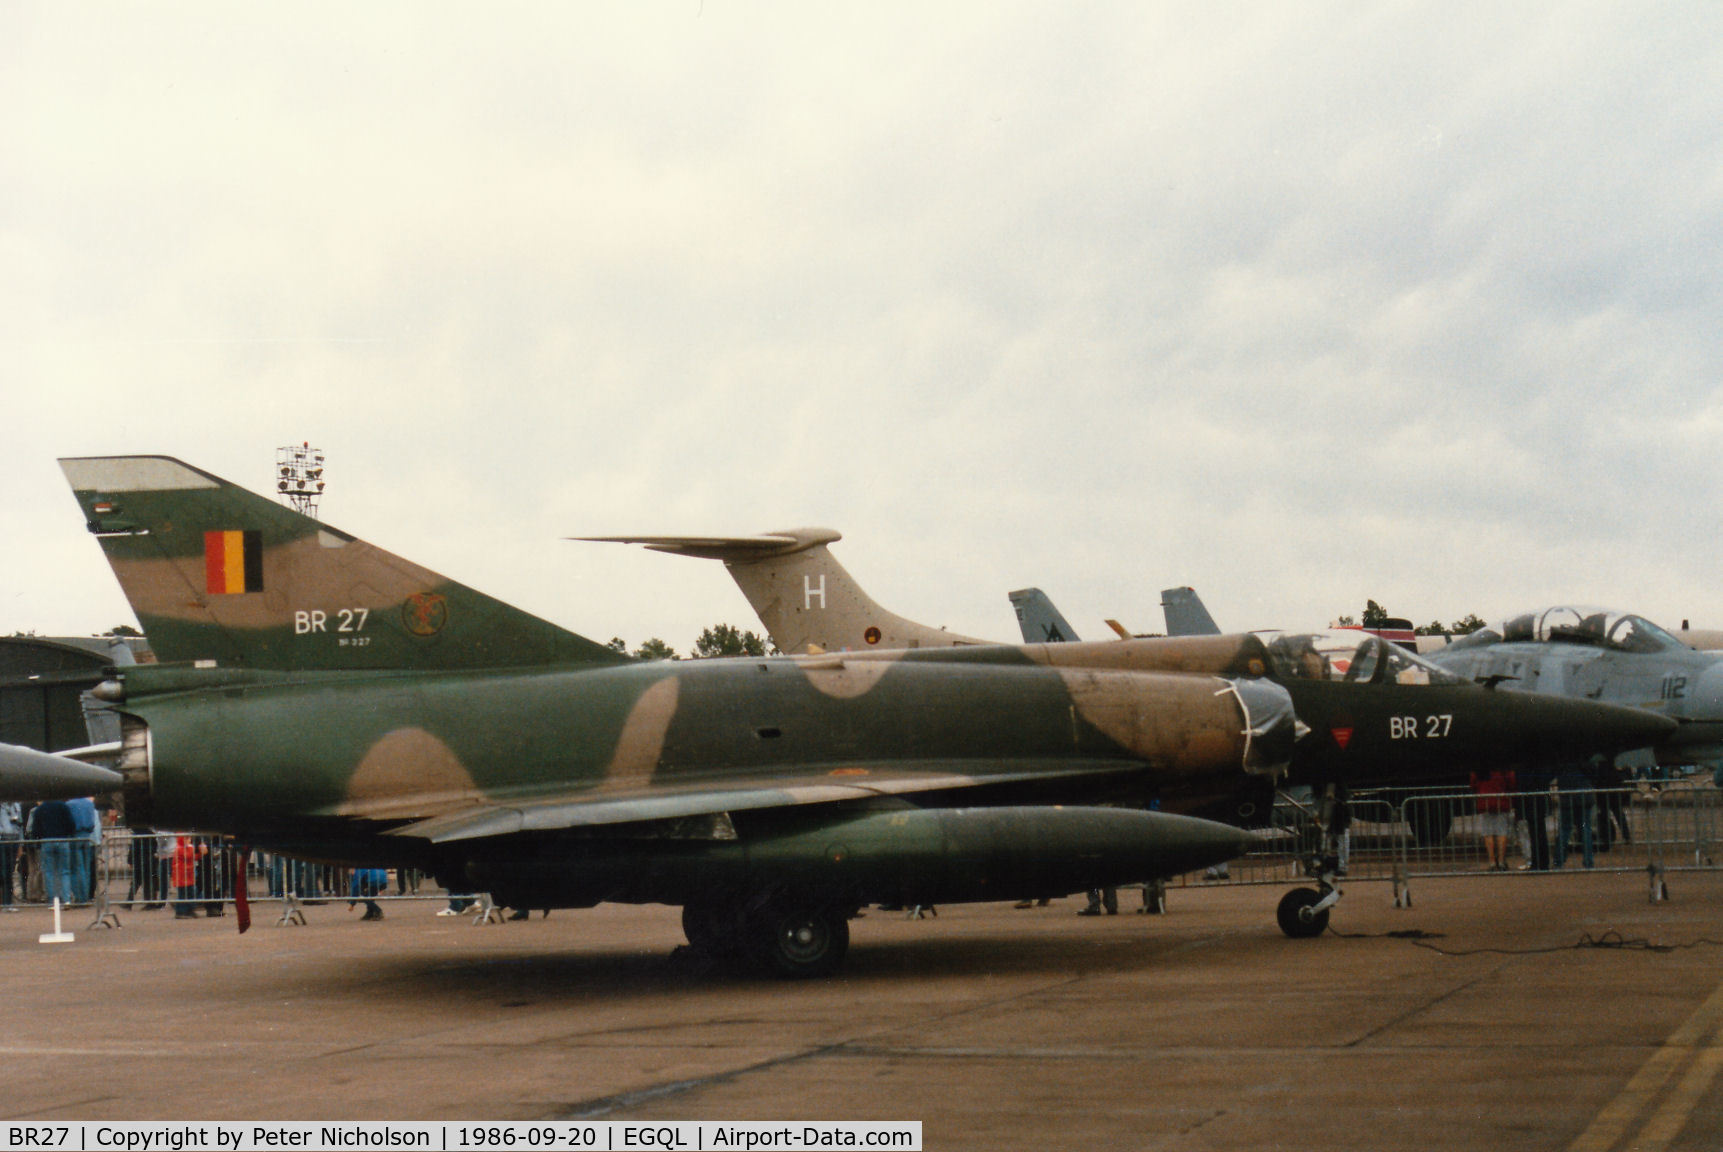 BR27, Dassault Mirage 5BR C/N 327, Mirage 5BR of 42 Squadron Belgian Air Force on display at the 1986 RAF Leuchars Airshow.